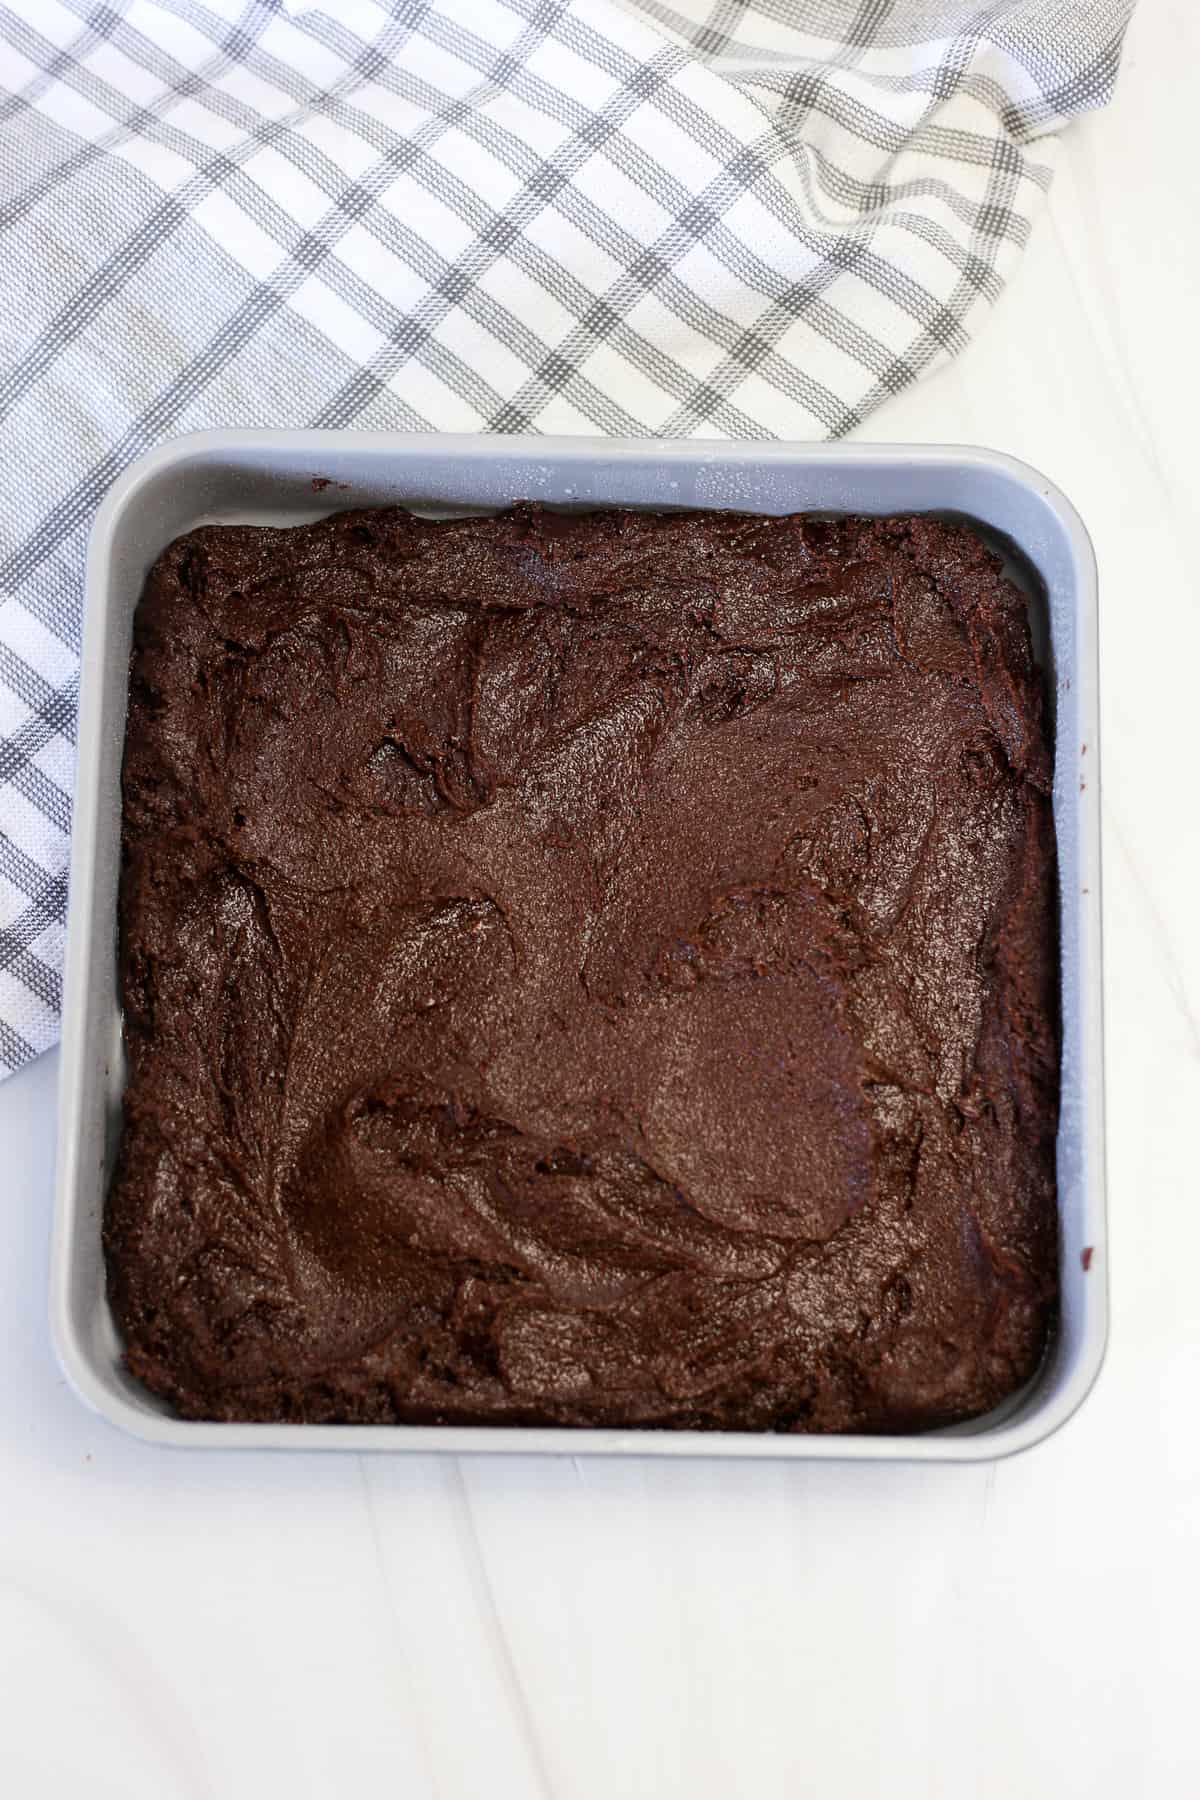 Brownie batter spread in a square metal pan before being baked.